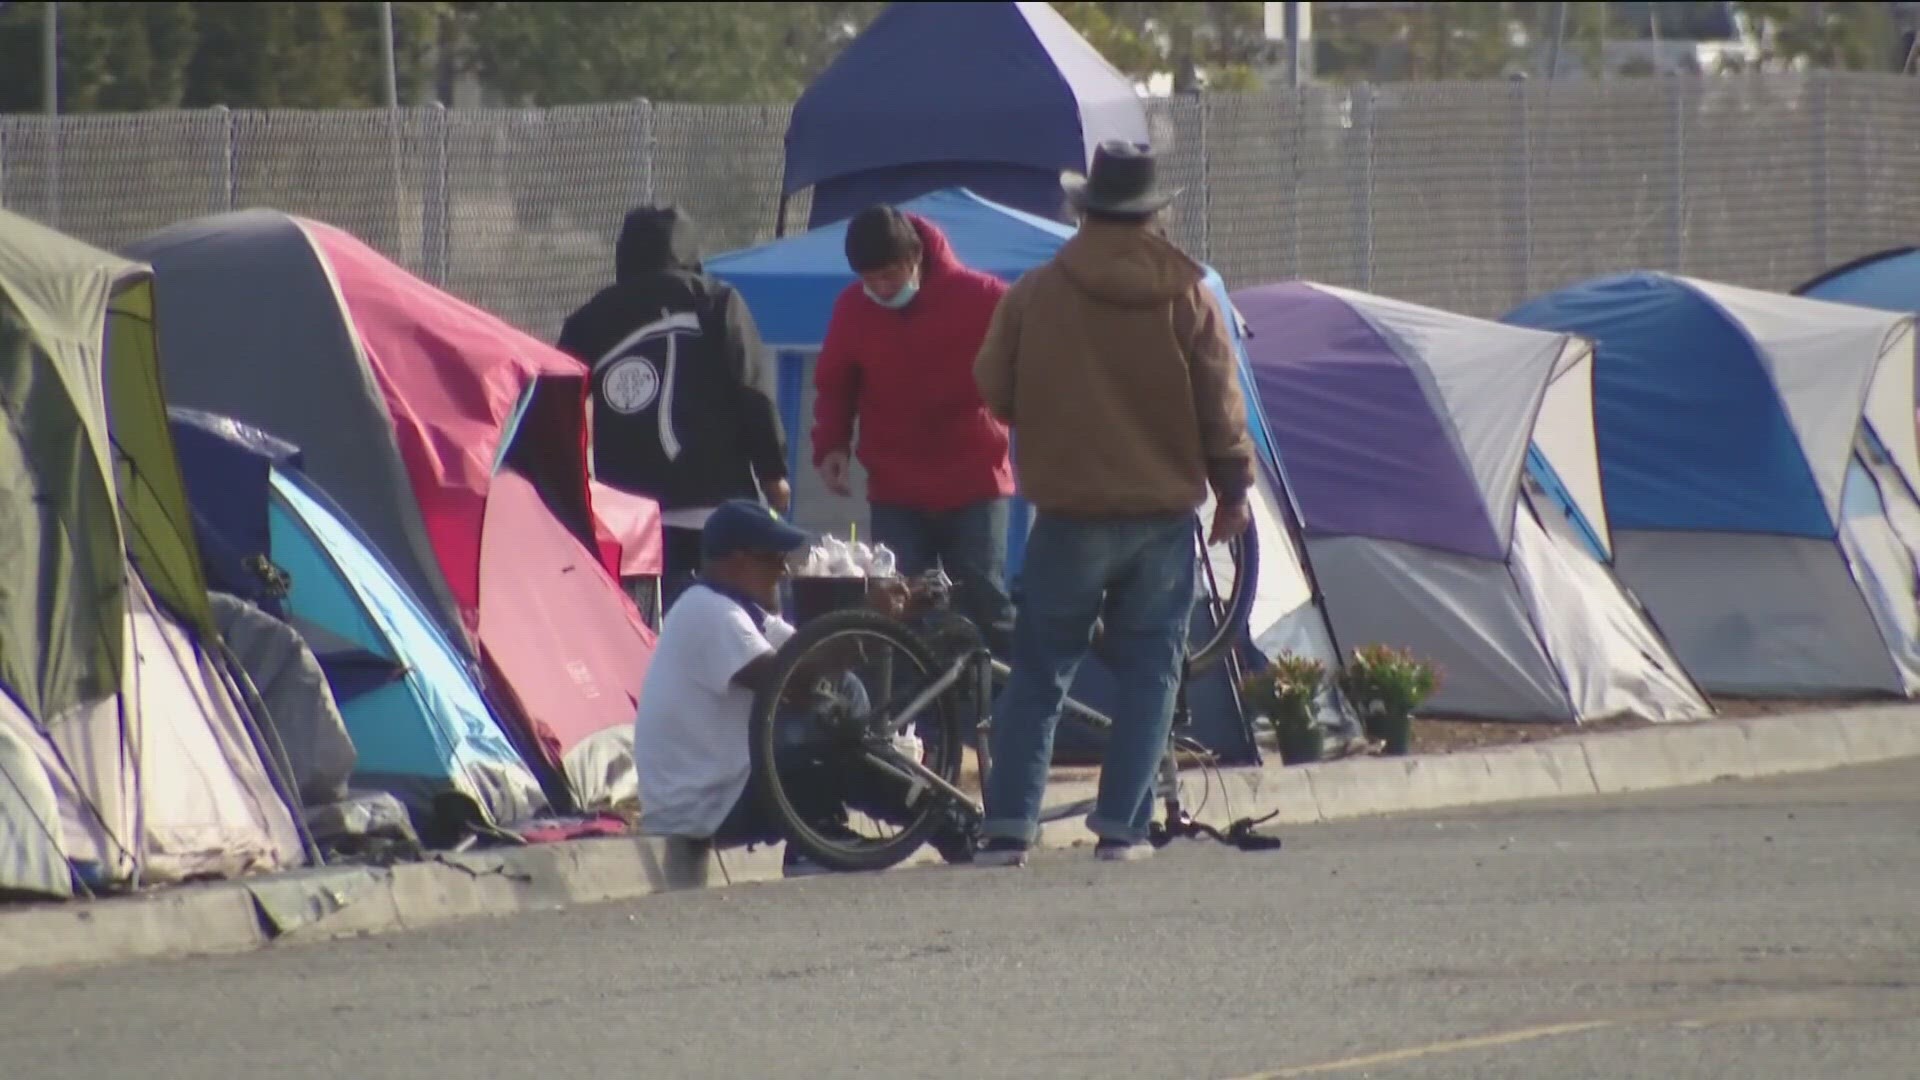 The new ordinance was passed by the city council last month and aims to clear the streets of encampments.